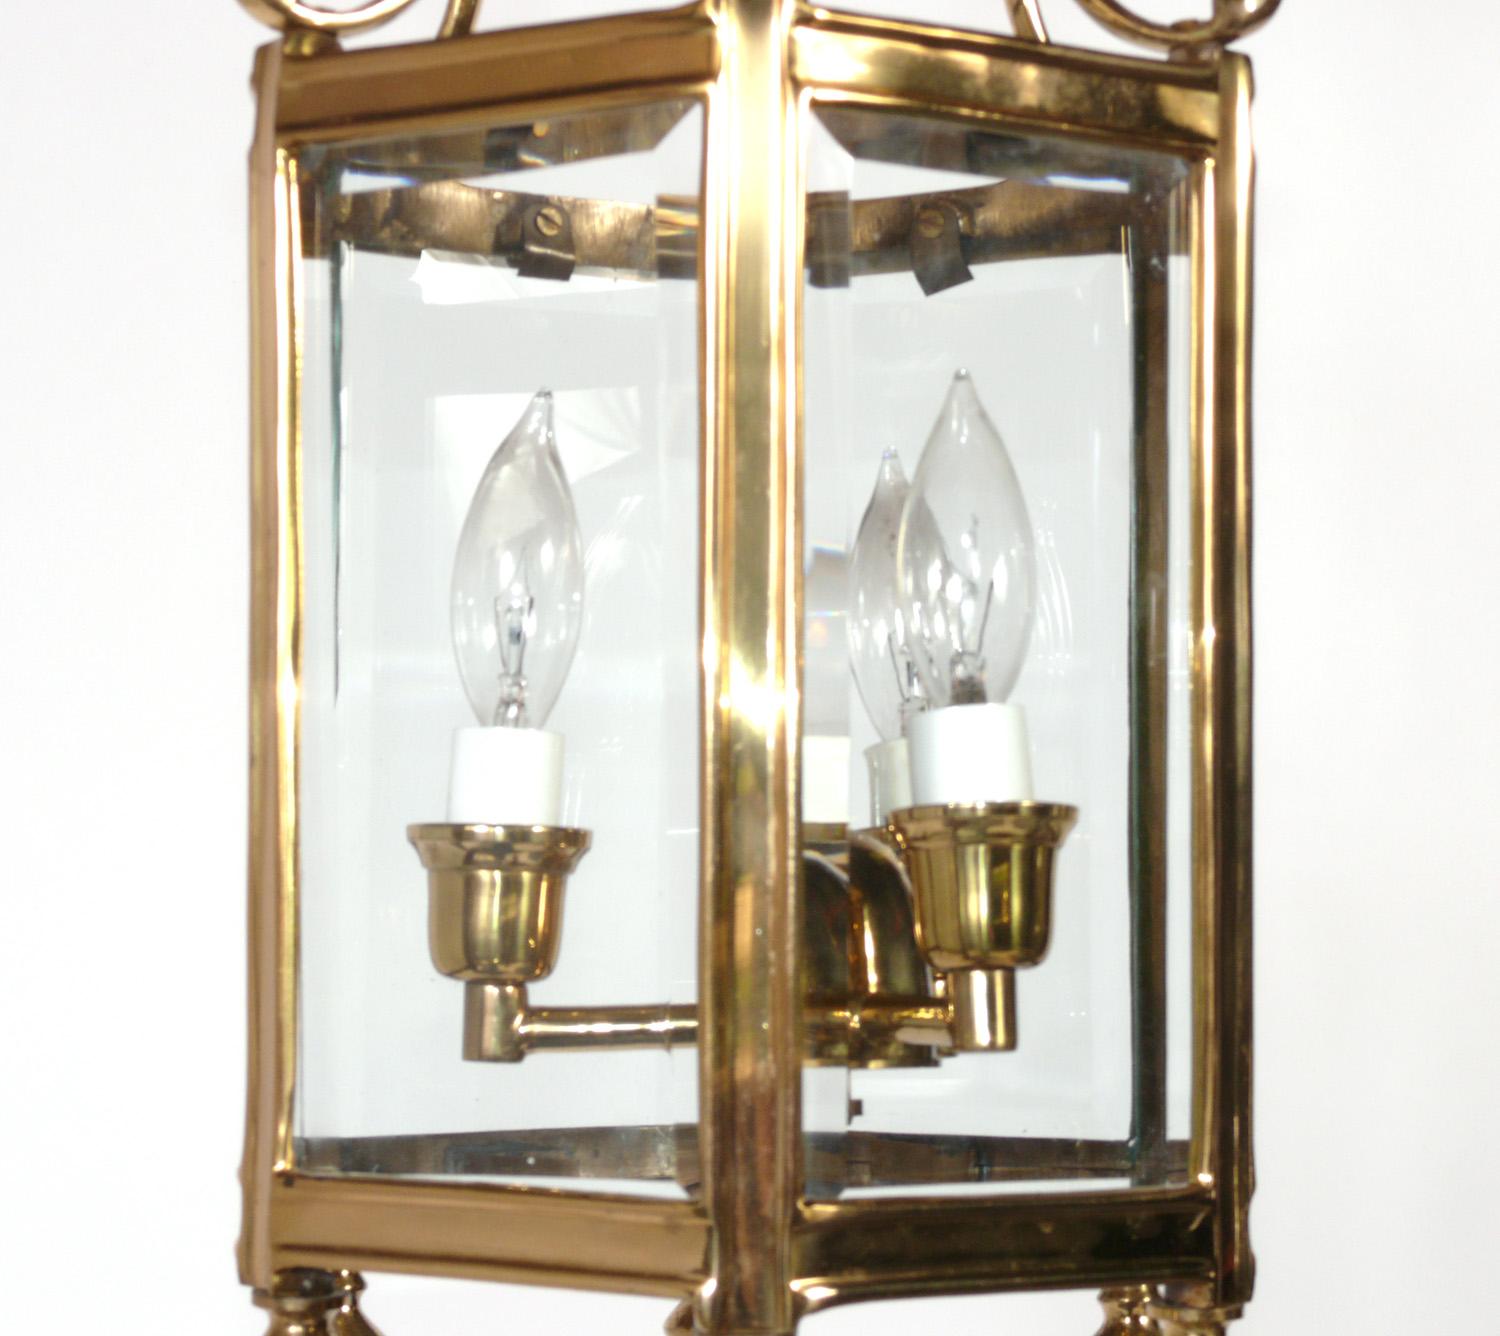 Elegant brass Lantern, American, circa 1960s. Elegant flush mount light fixture, perfect for a foyer or hall. Rewired and ready to mount.